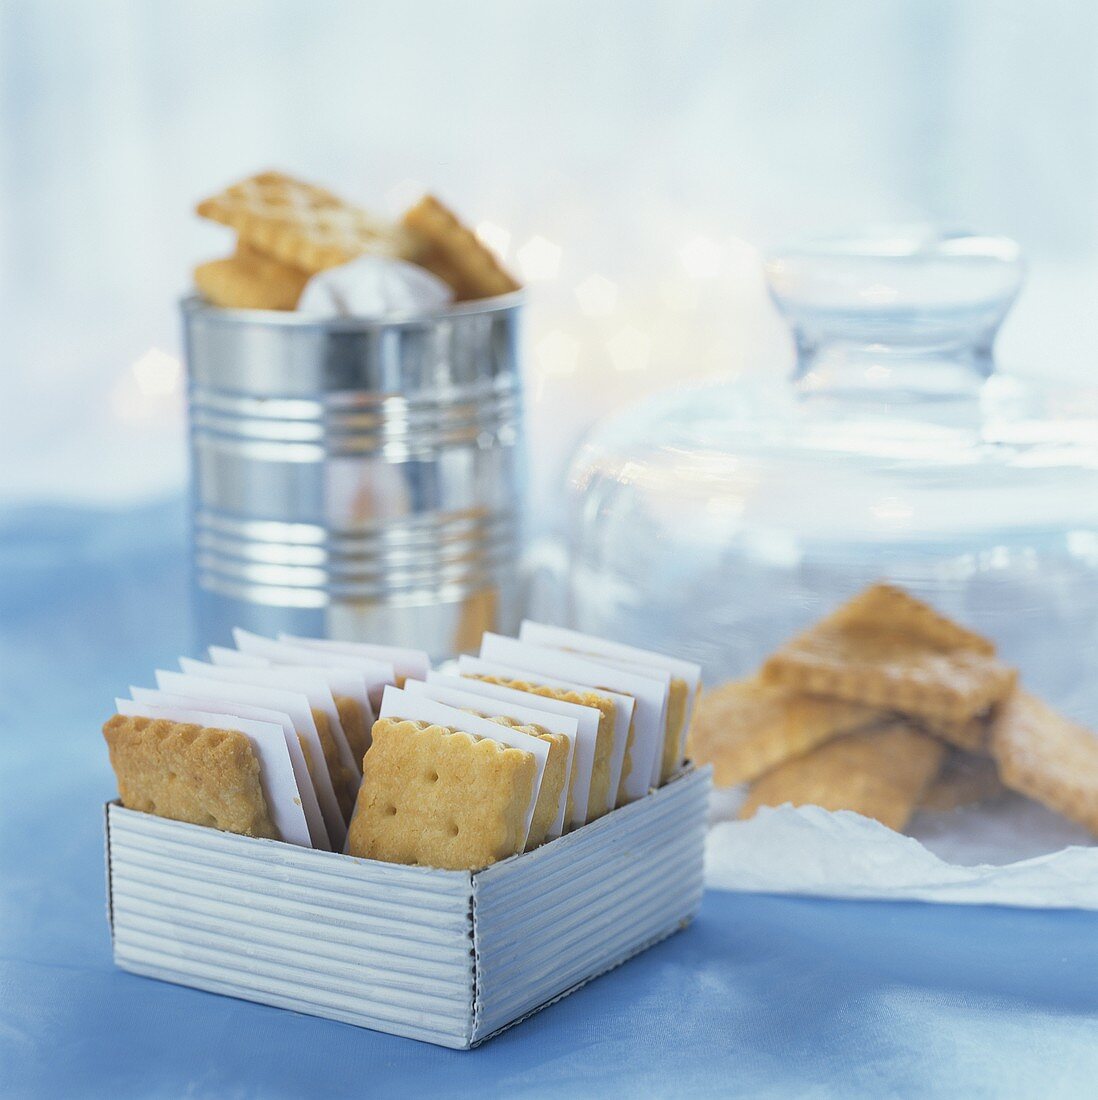 Several Parmesan biscuits in containers